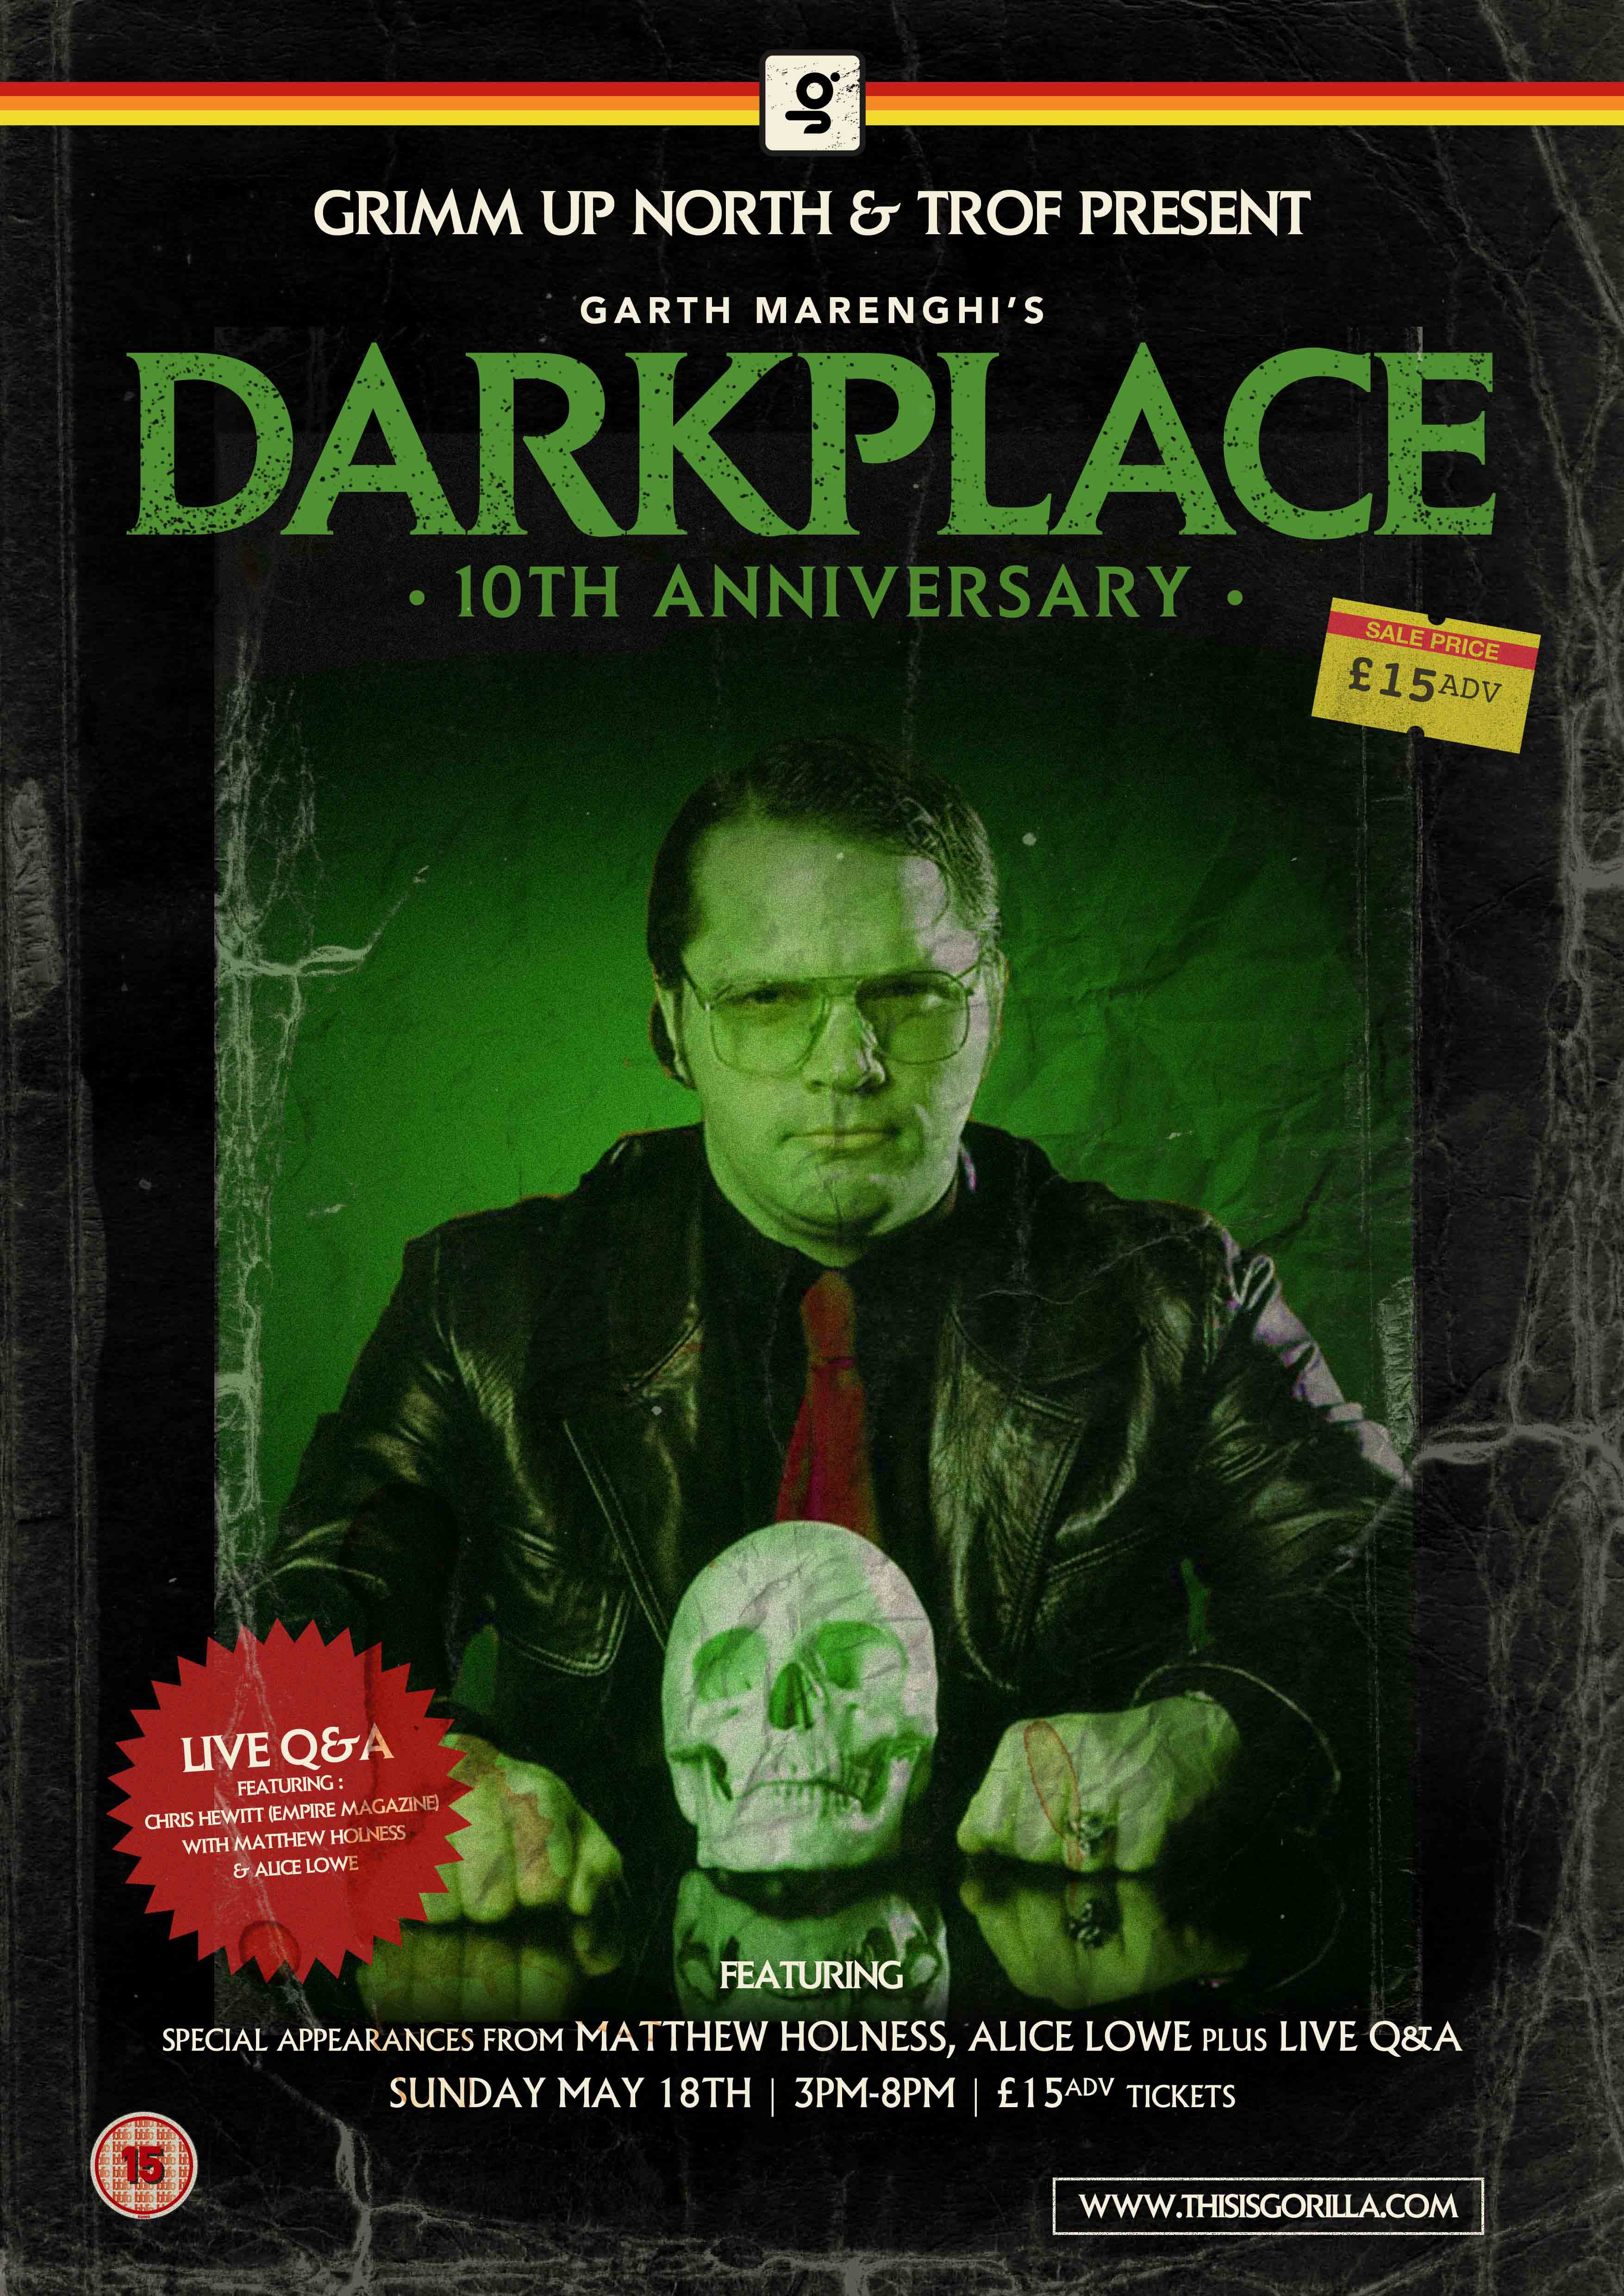 GARTH MERENGHI'S DARKPLACE 10th ANNIVERSARY EVENT WITH SPECIAL GUESTS3508 x 4961